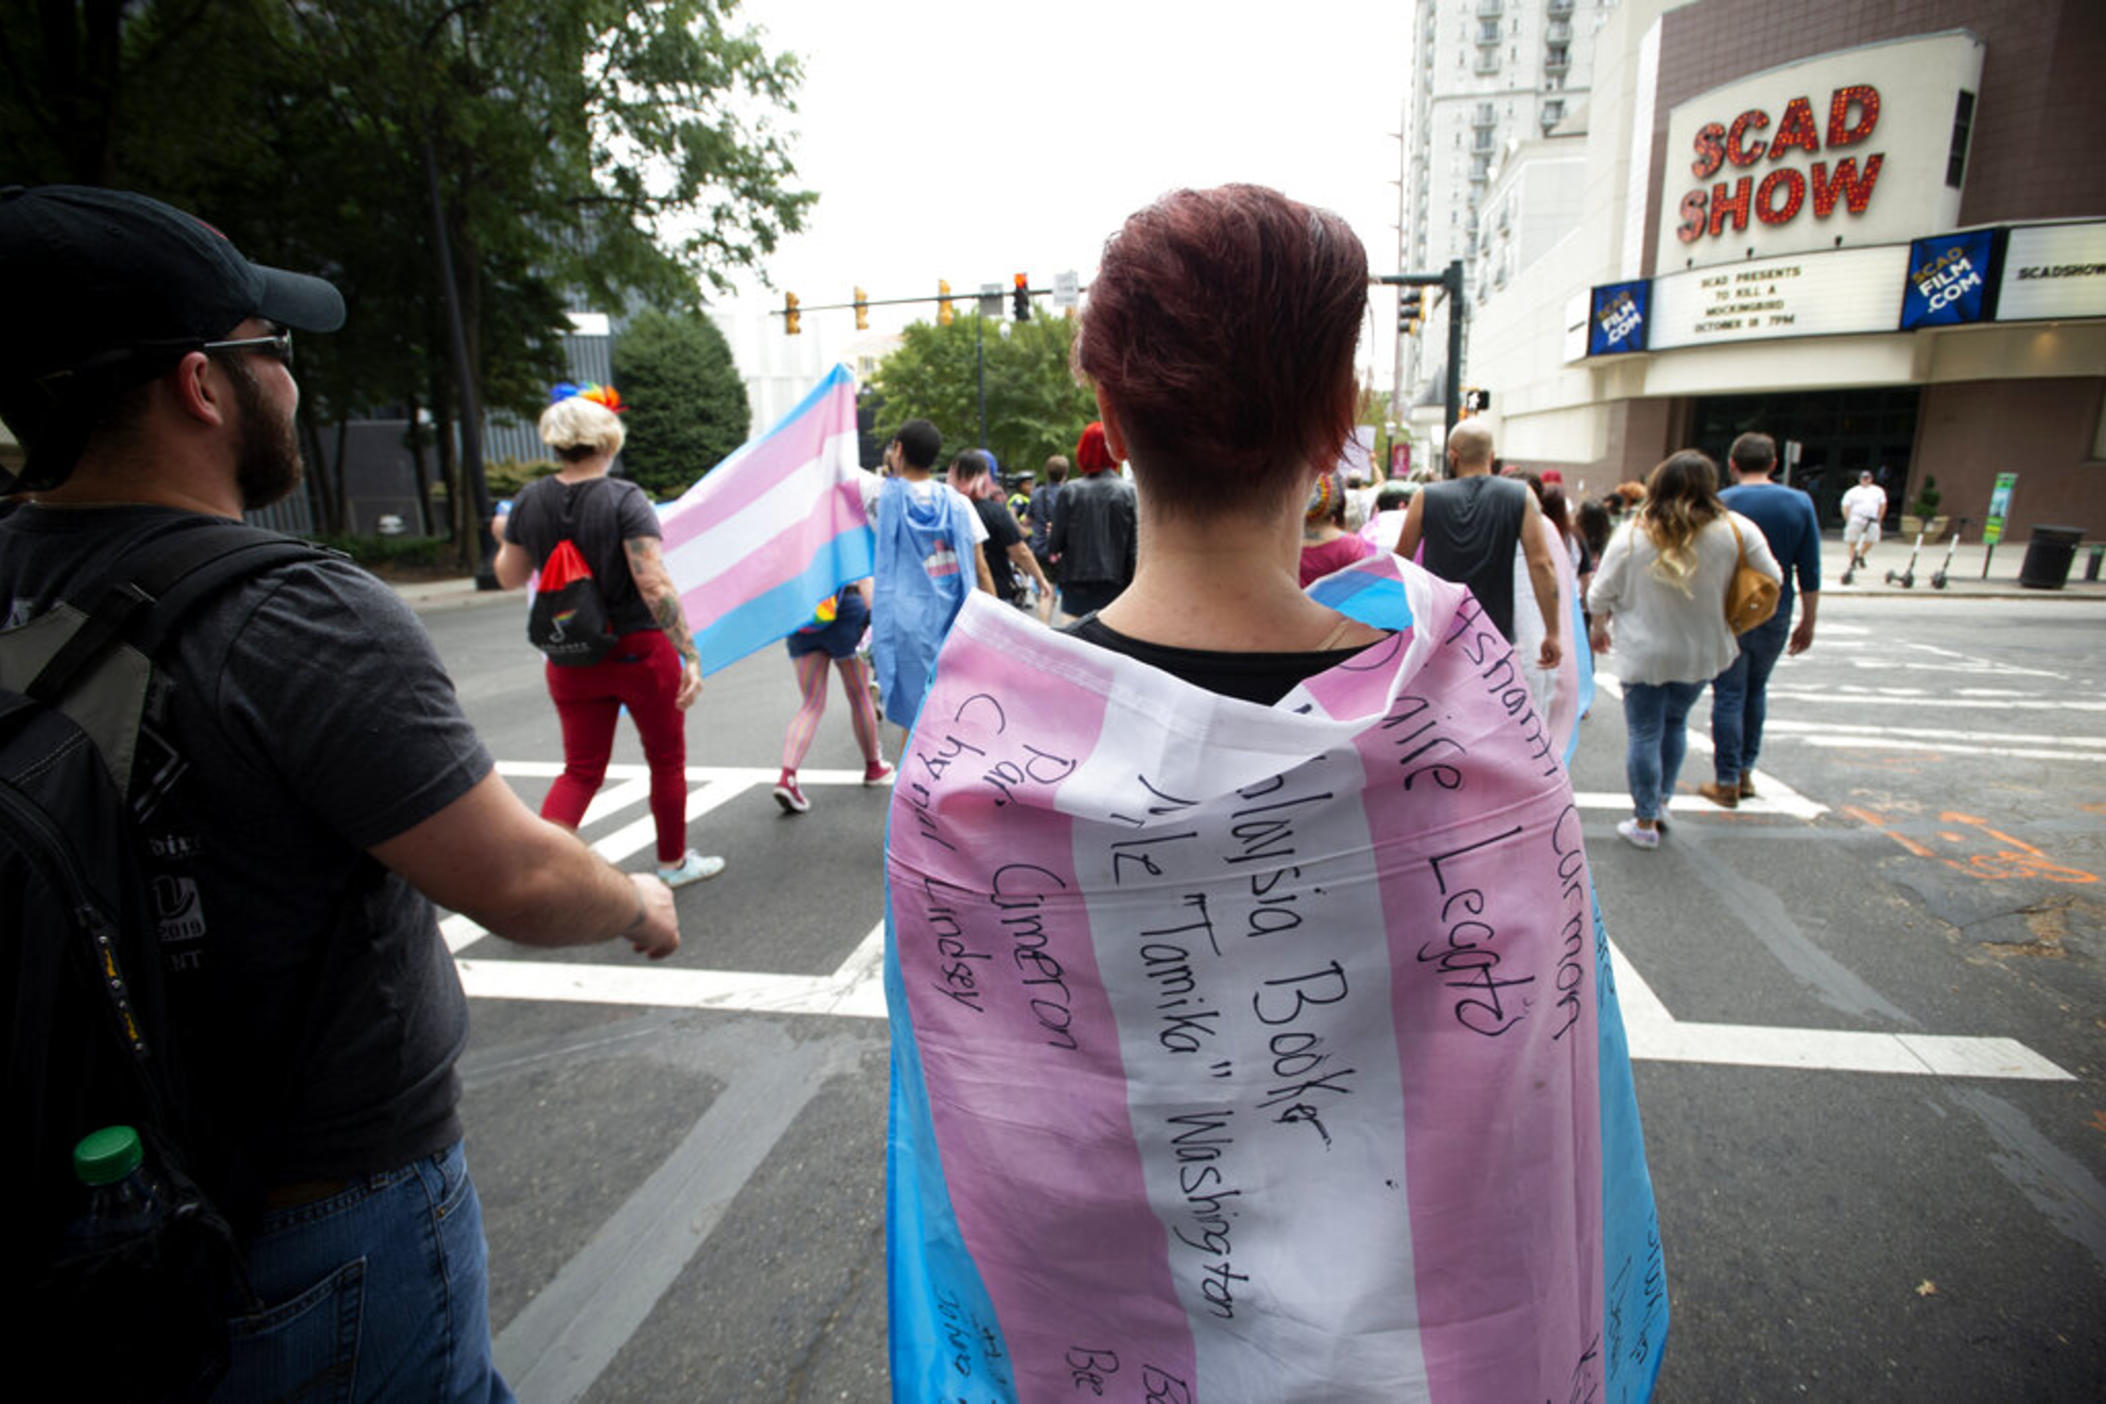 A supporter for the transgender and non-binary community, wearing a transgender flag with handwritten names of black trans women who the person said were killed in 2019, strolls through the city's Midtown district during Gay Pride Festival's Transgender Rights March in Atlanta on Saturday, Oct. 12, 2019. The march was part of the annual Gay Pride Festival. (AP Photo/Robin Rayne)